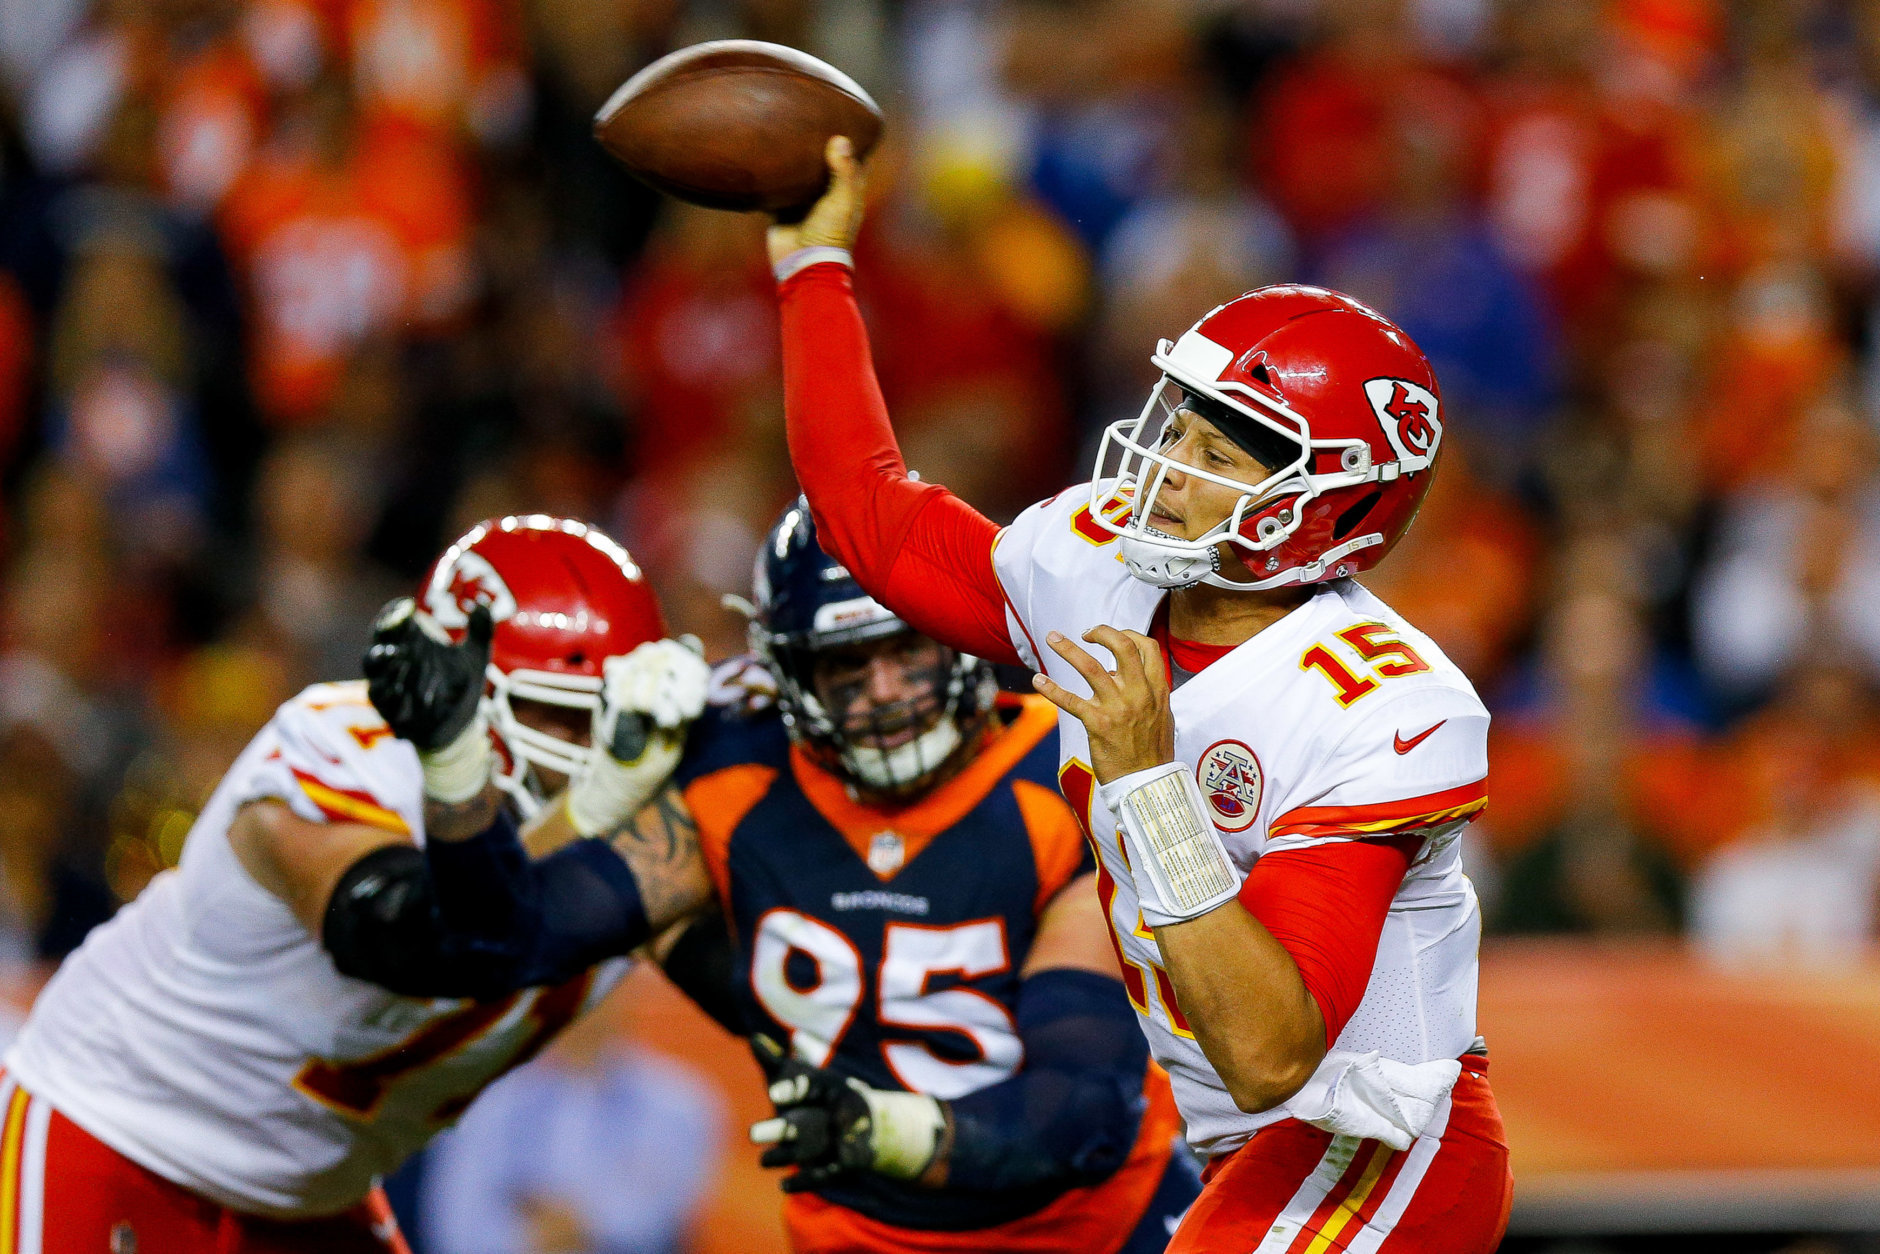 DENVER, CO - OCTOBER 1:  Quarterback Patrick Mahomes #15 of the Kansas City Chiefs passes against the Denver Broncos in the second quarter of a game at Broncos Stadium at Mile High on October 1, 2018 in Denver, Colorado. (Photo by Justin Edmonds/Getty Images)